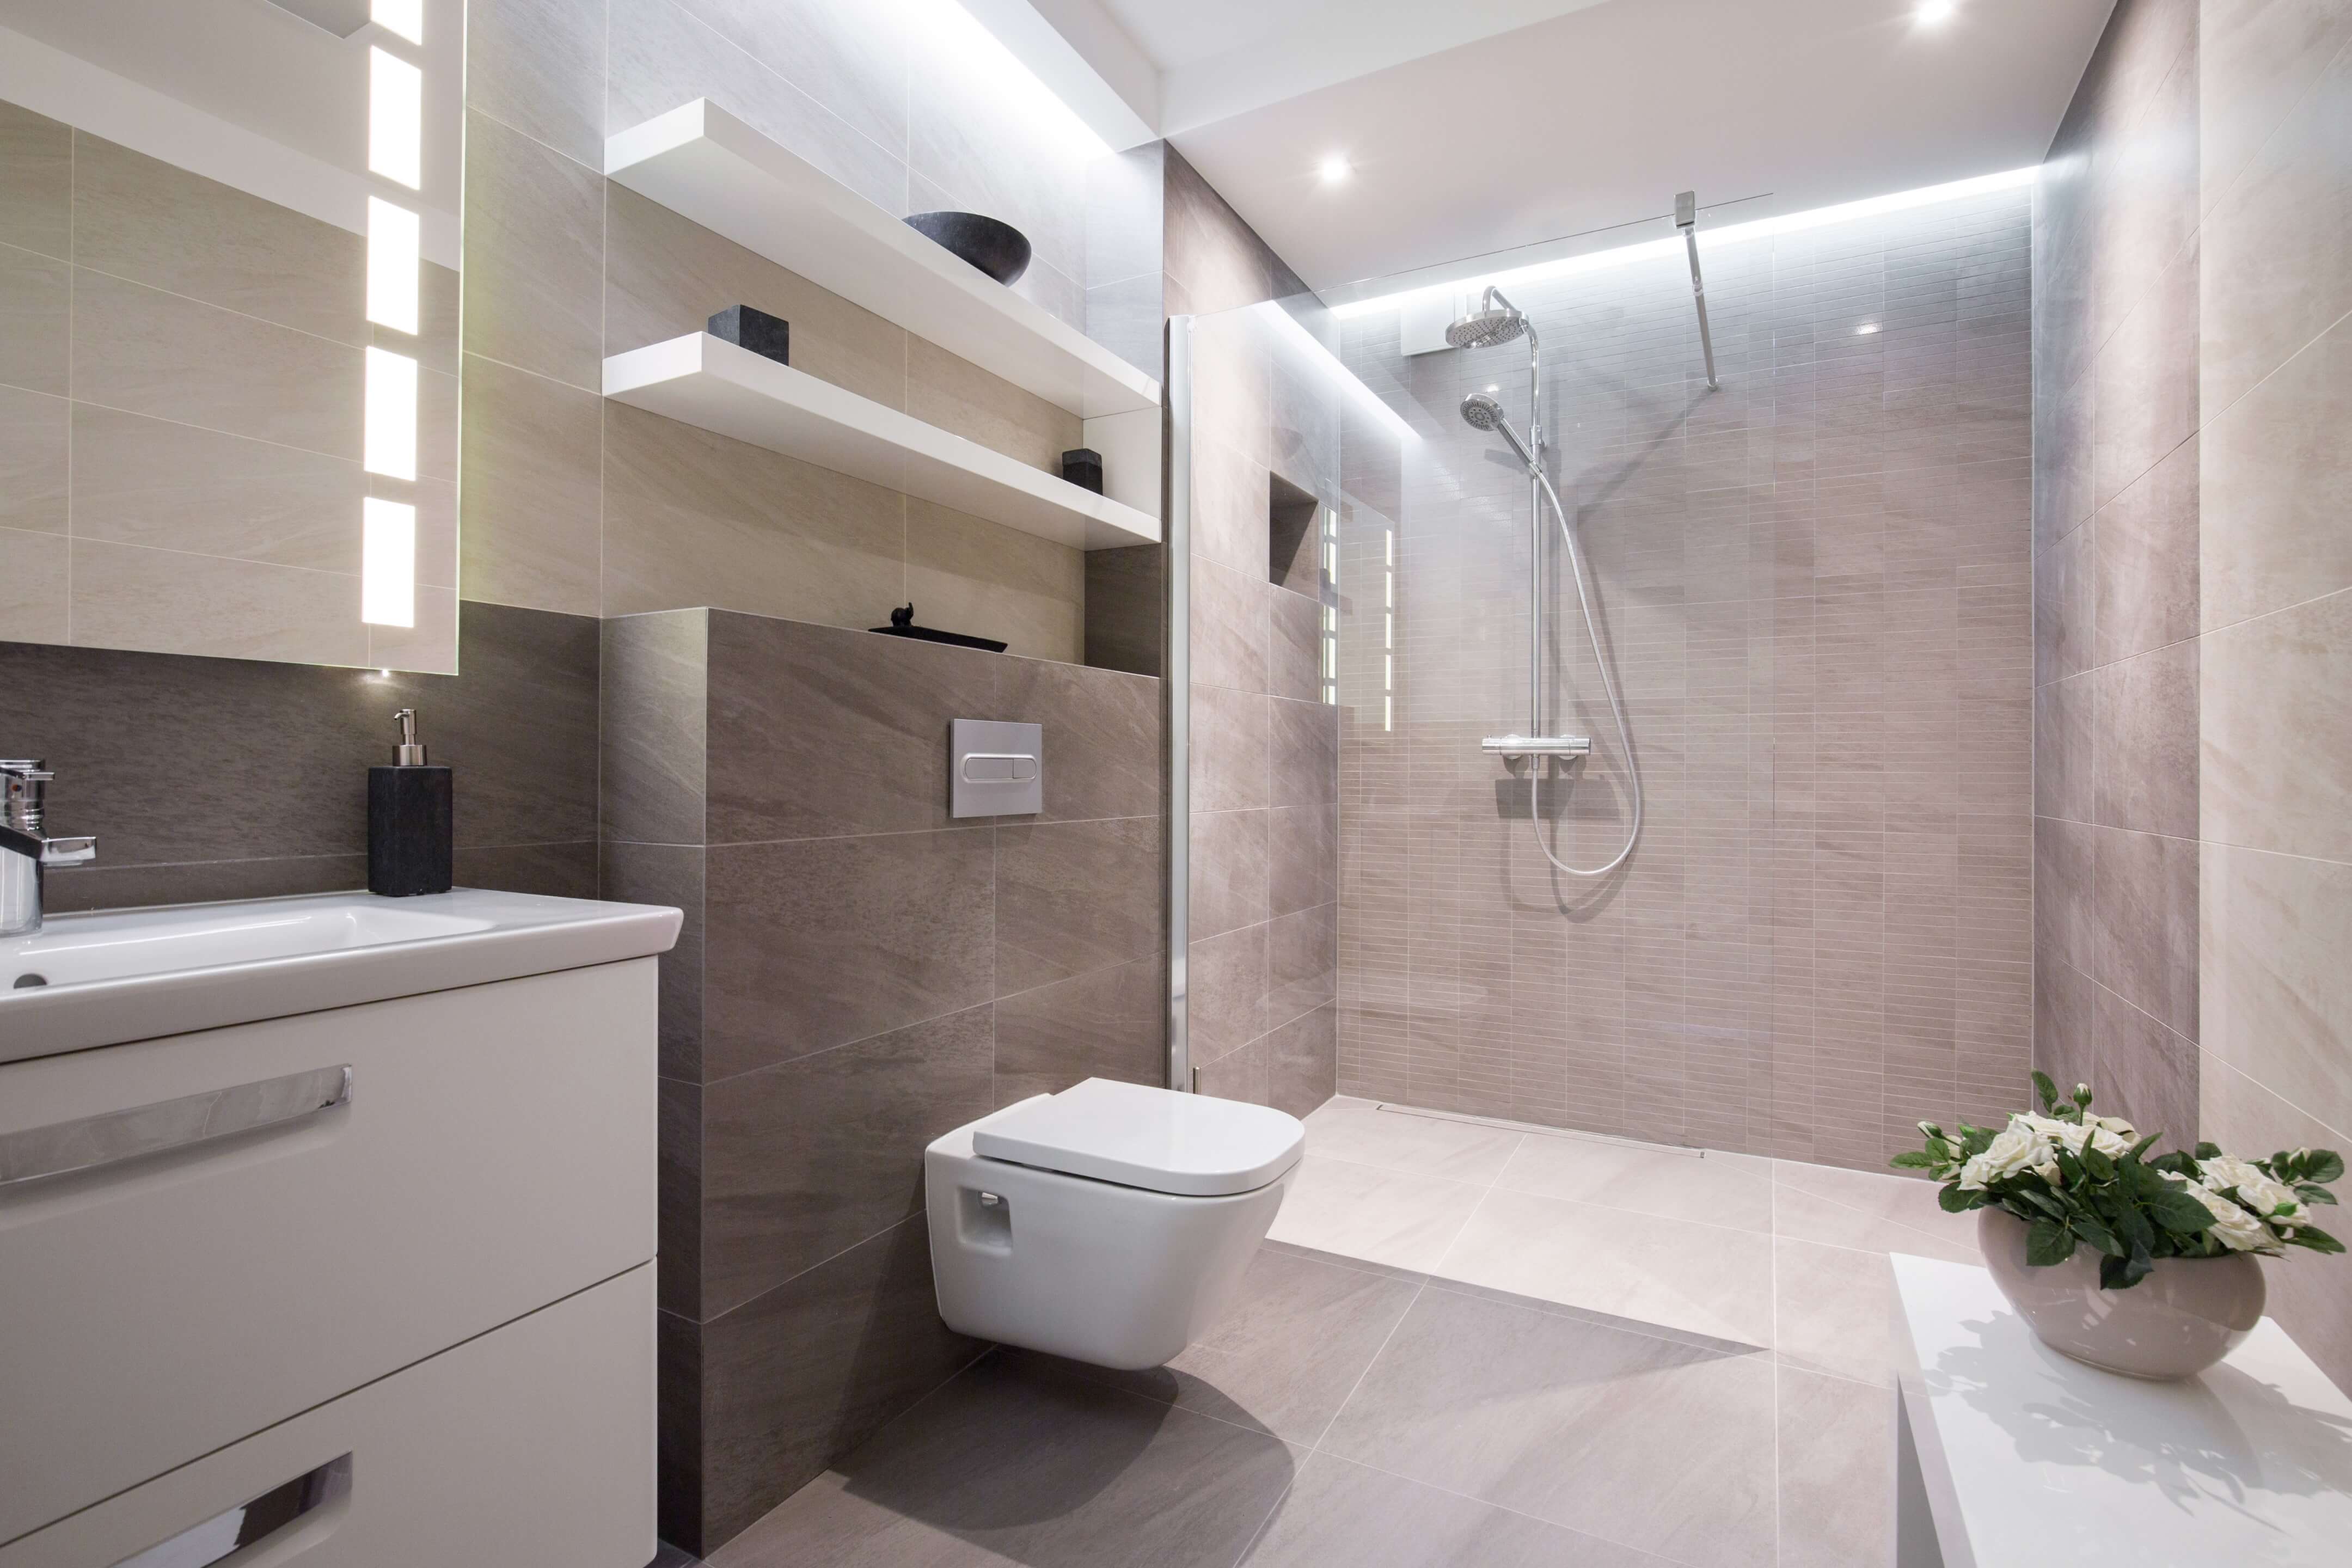 local bathroom fitters billericay